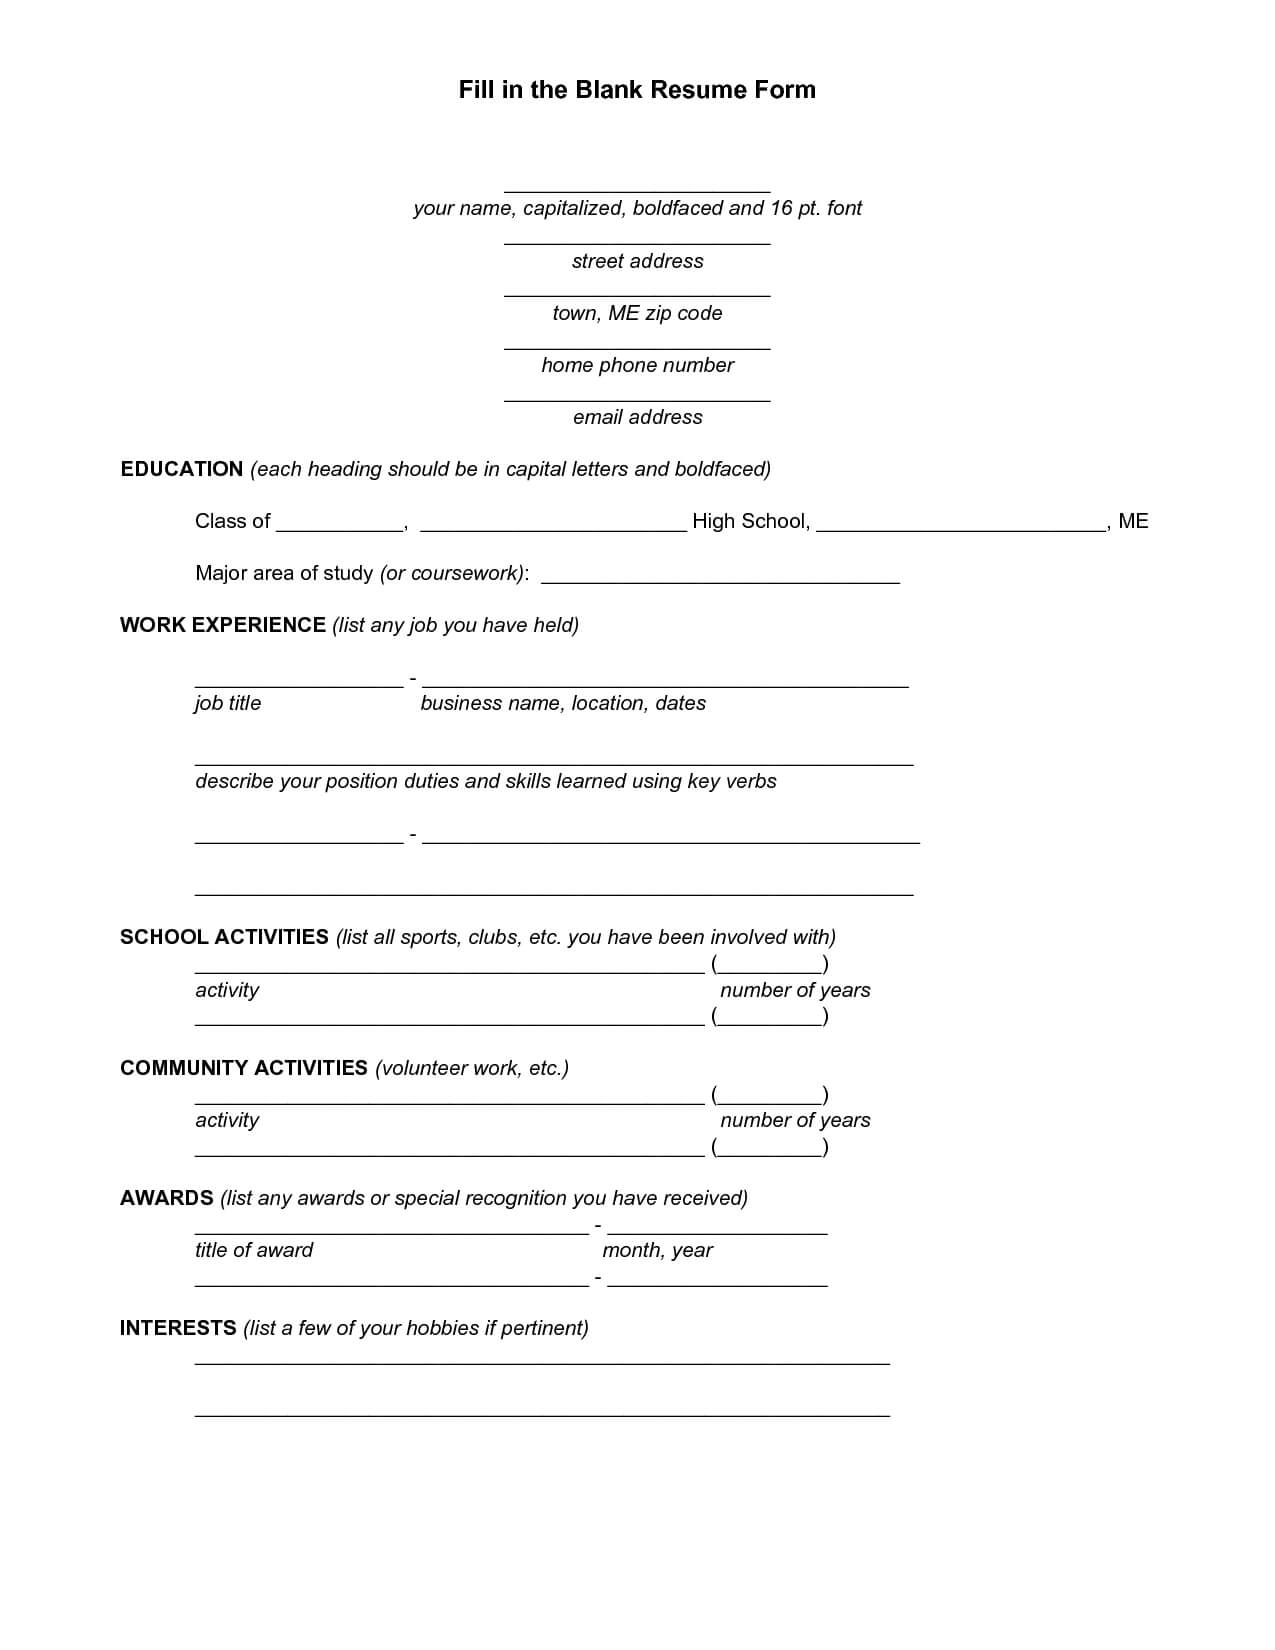 You Can Fill In | Student Resume, Resume Form, Job Resume In Free Bio Template Fill In Blank